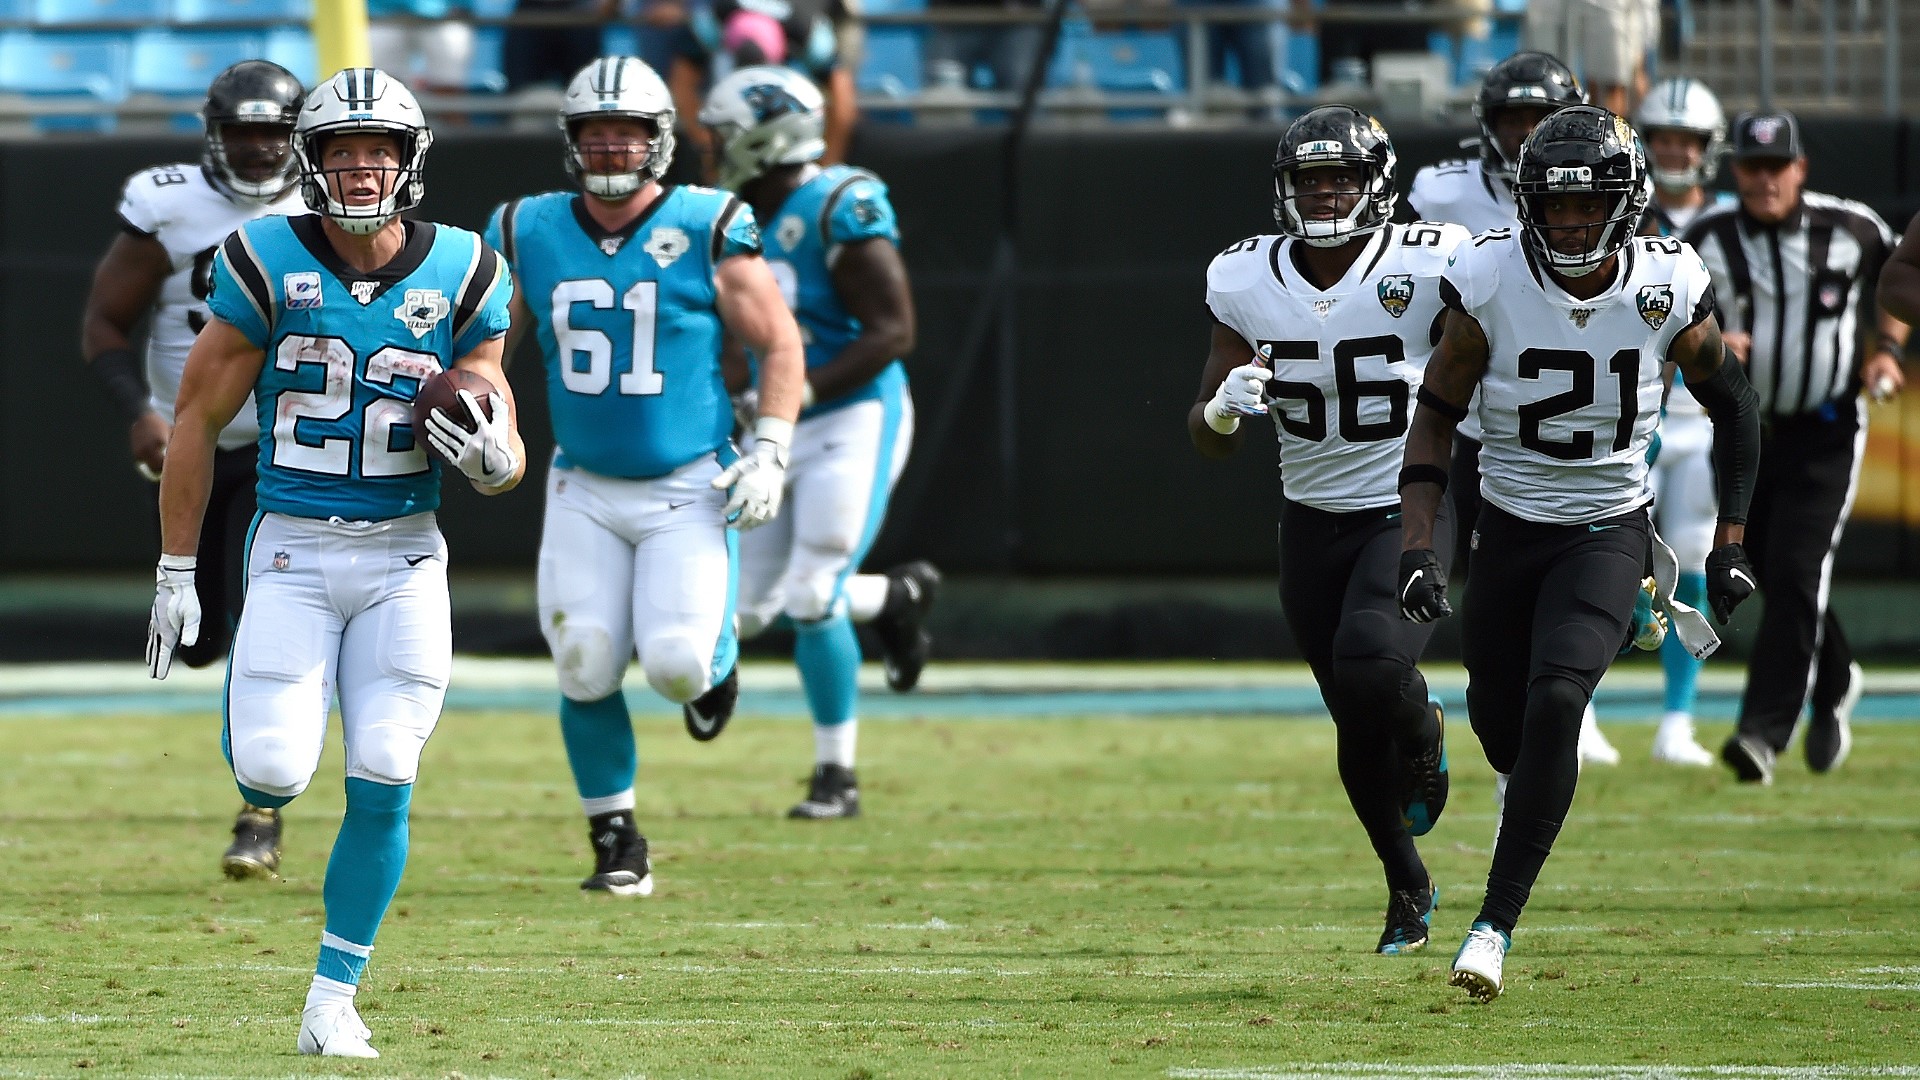 The Carolina Panthers improved to 3-2 on the season with an exciting 34-27 win over the Jacksonville Jaguars Sunday.